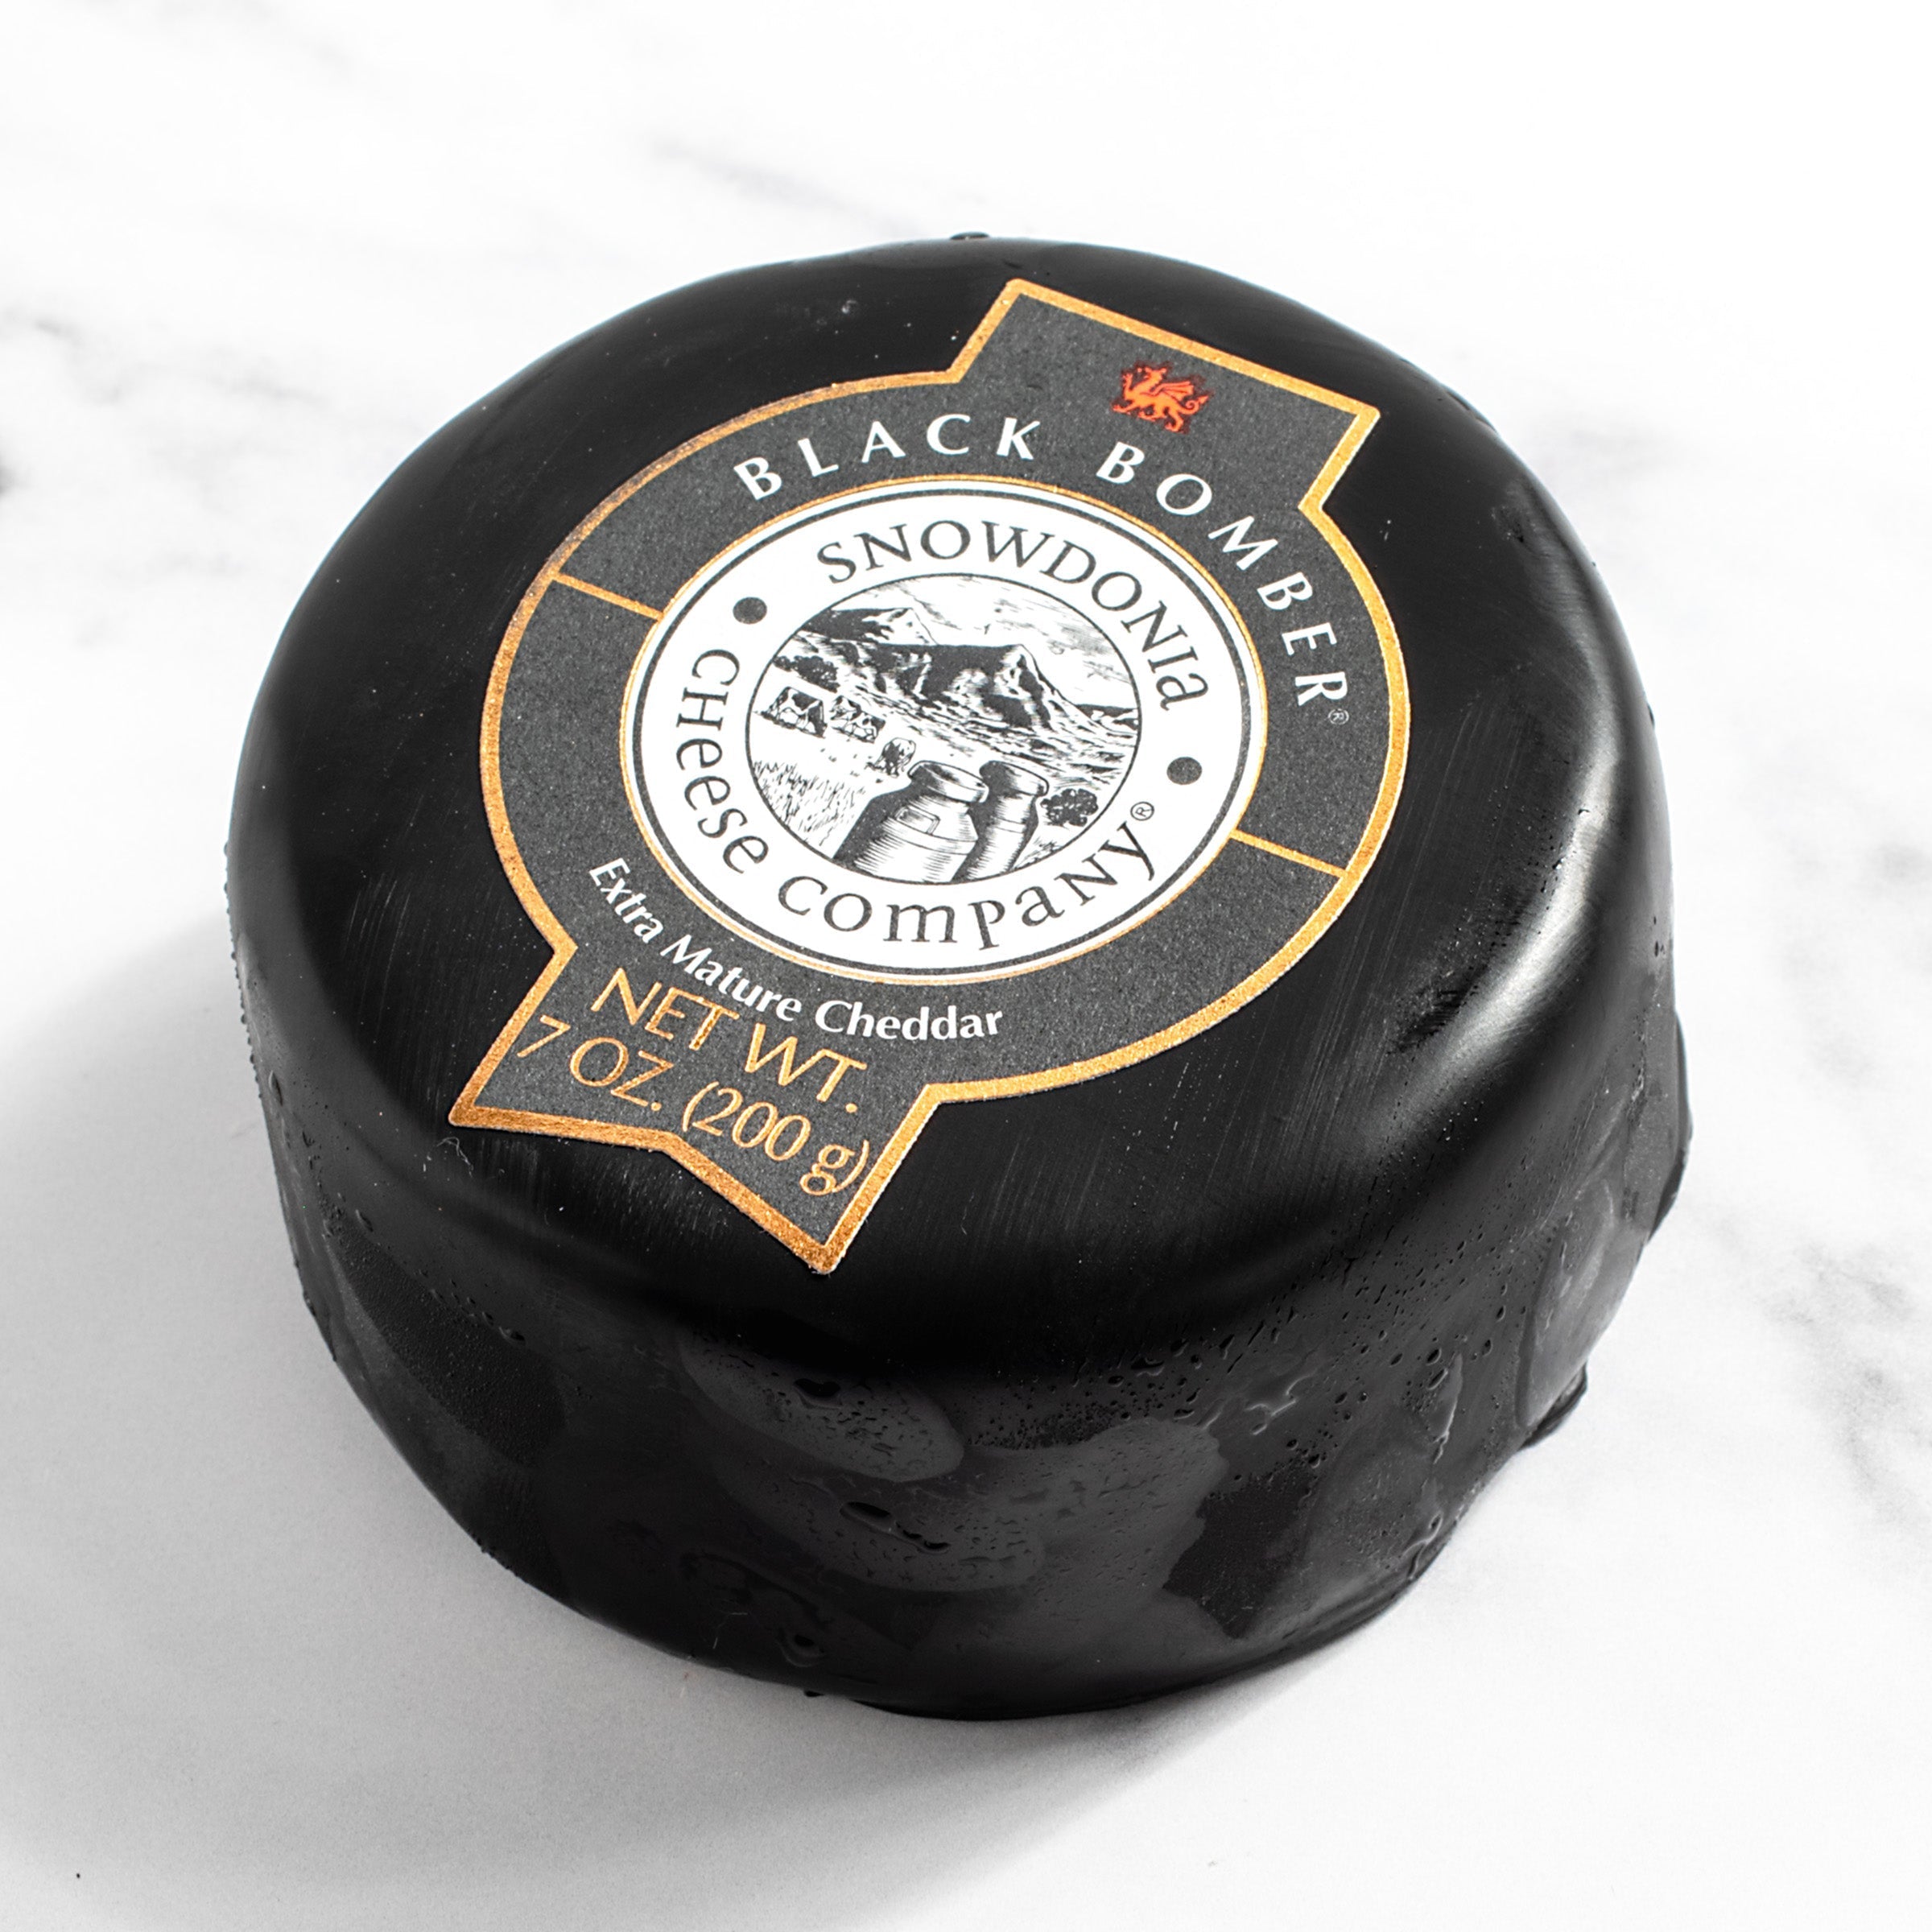 Little Black Bomber Welsh Truckle Cheese Mature Cheddar 7oz 6ct